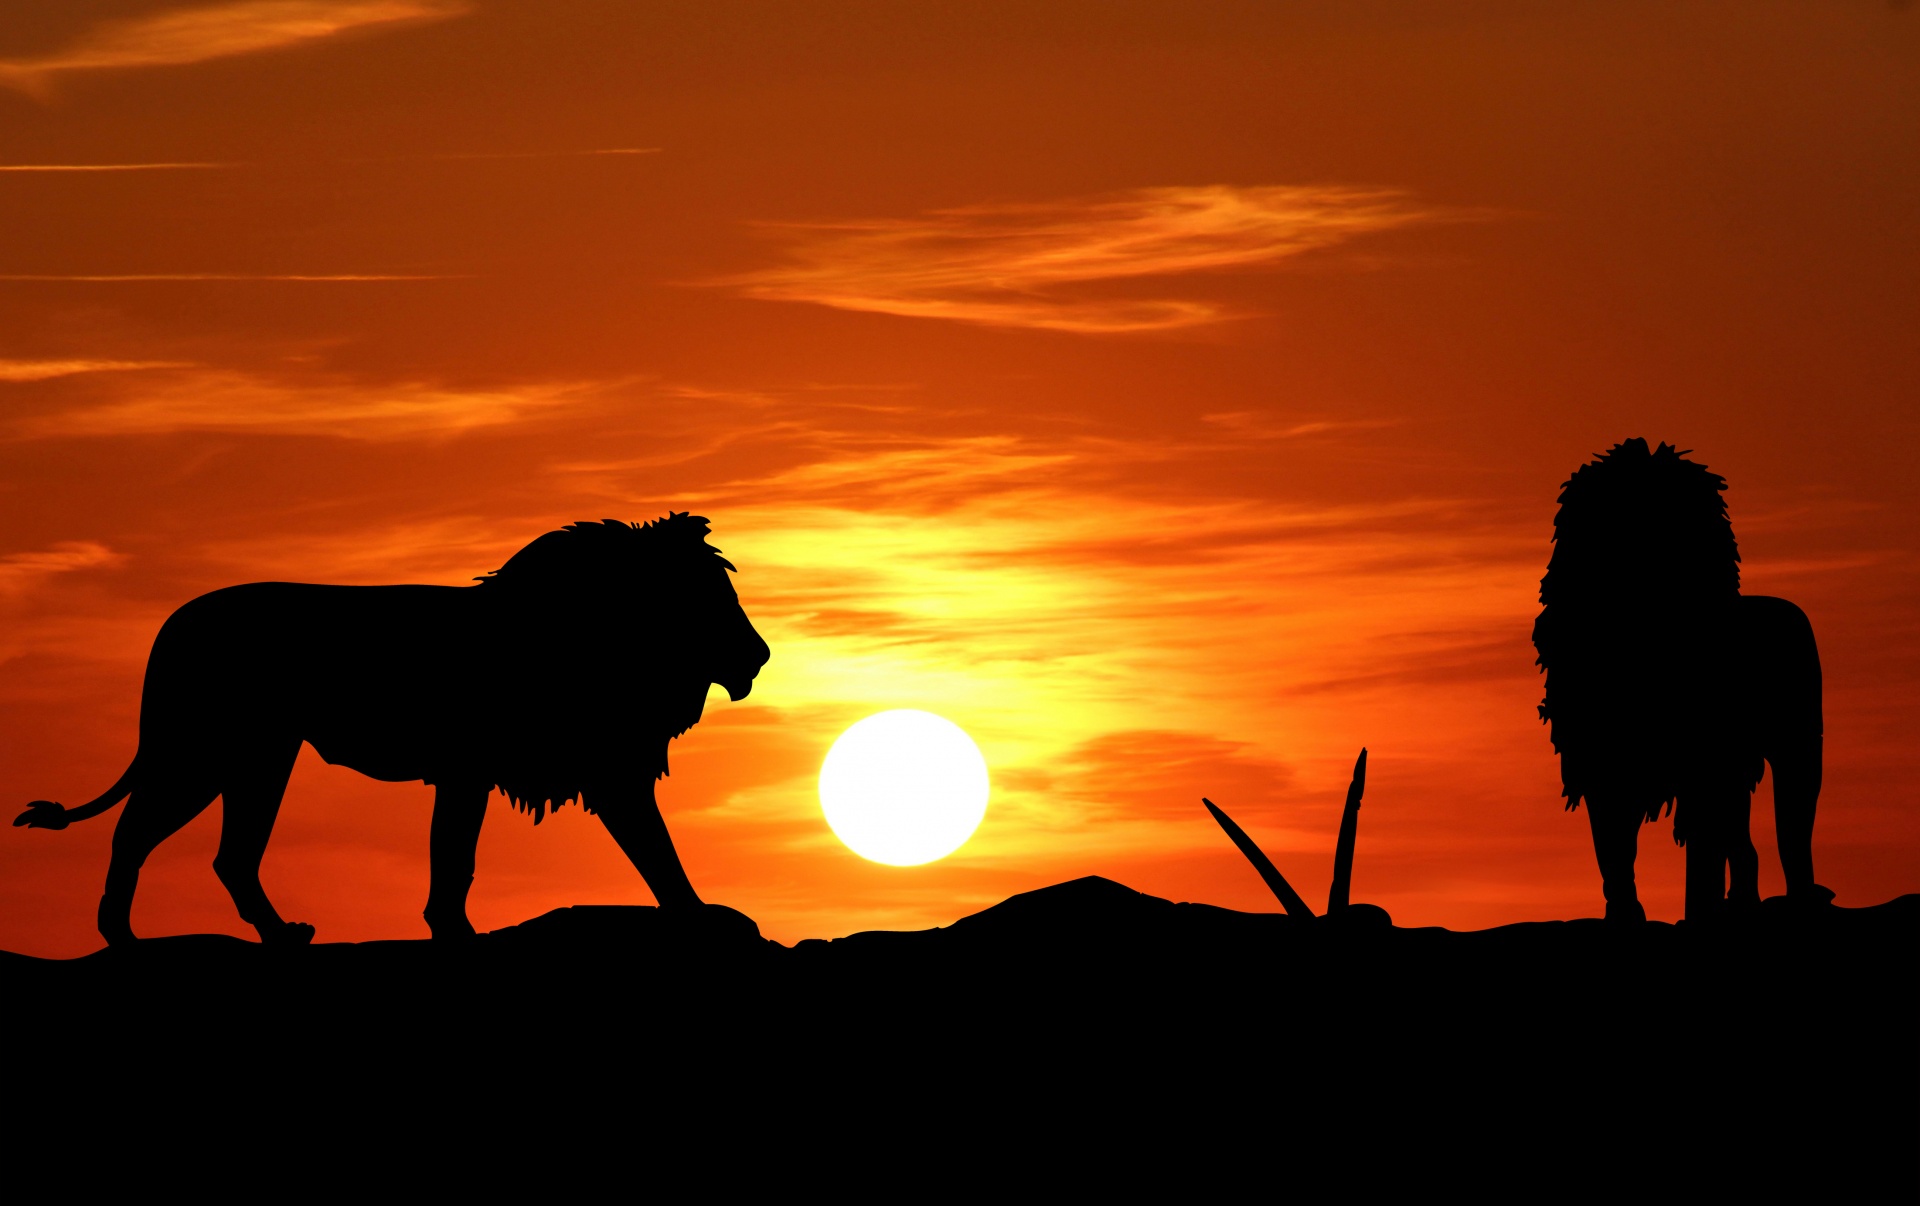 lion-silhouette-at-sunset-1521529744gYj.jpg